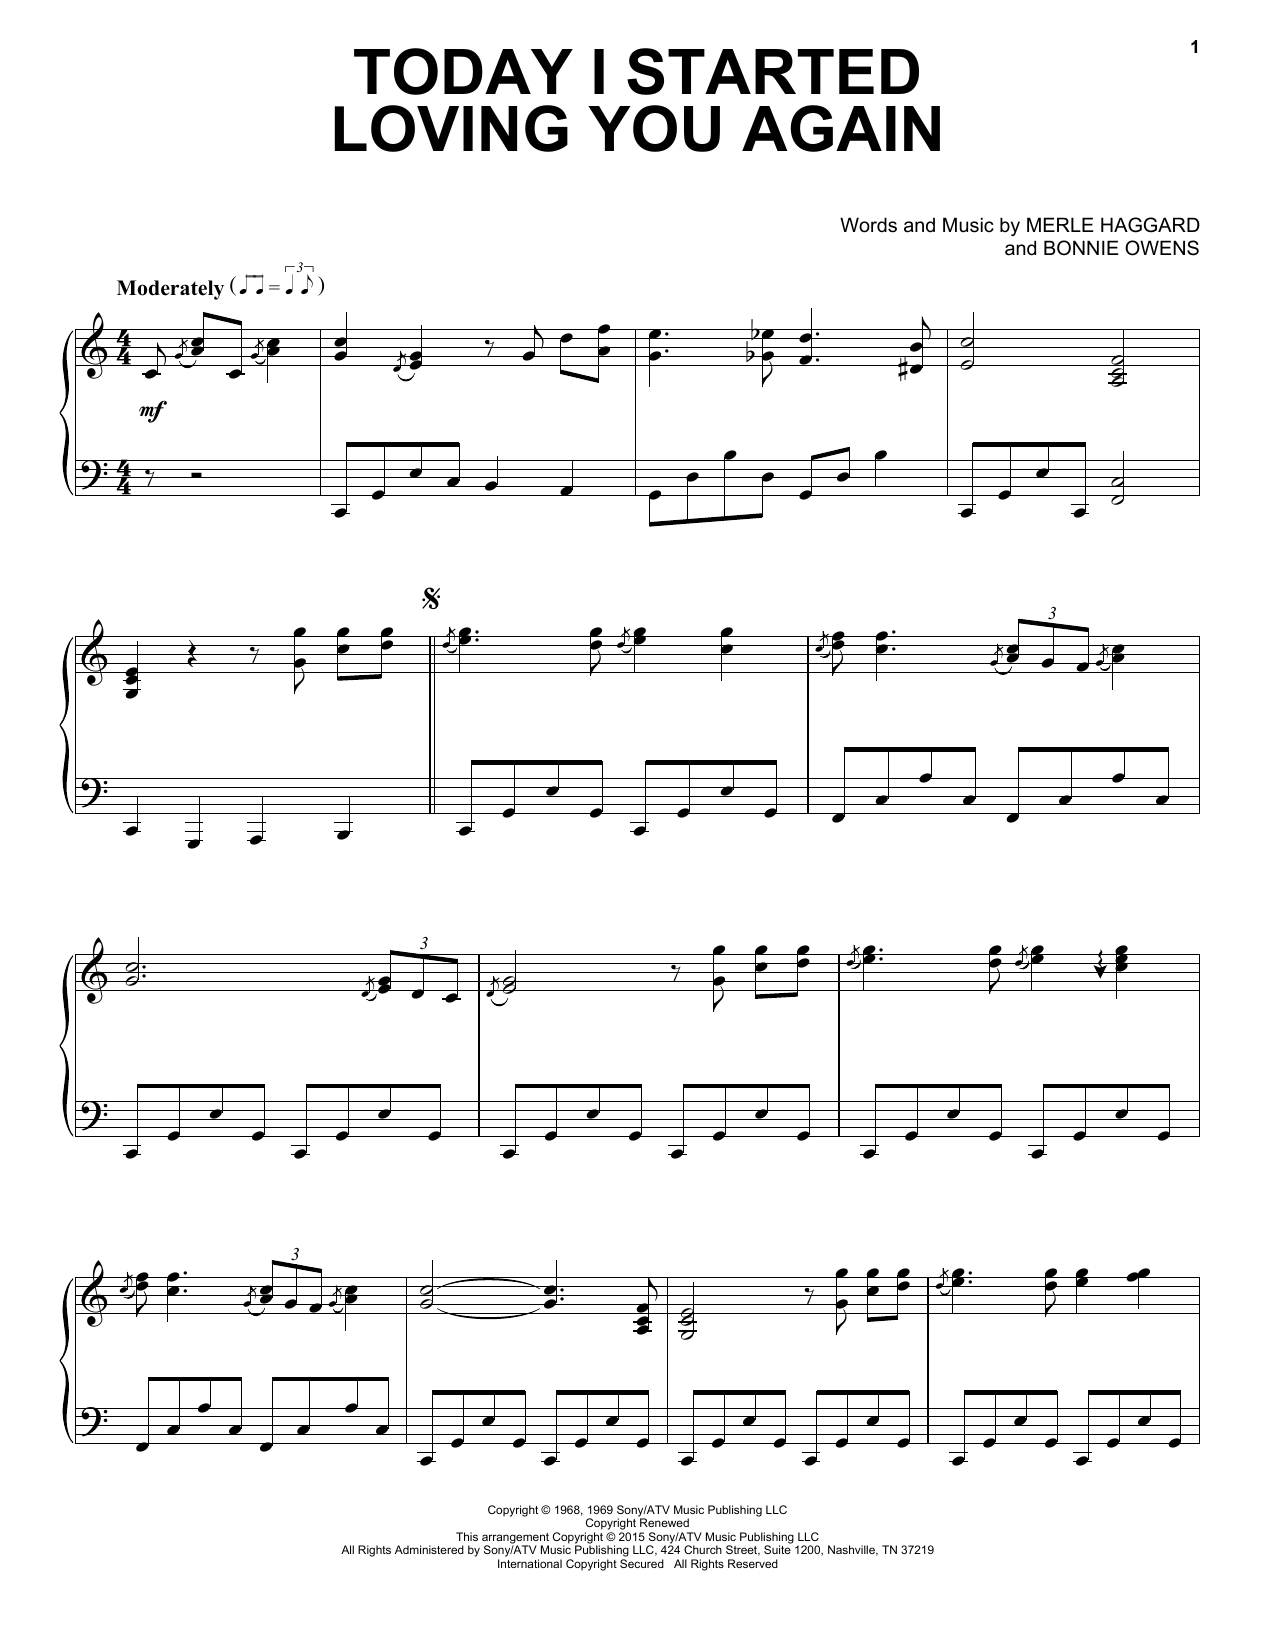 Download Merle Haggard Today I Started Loving You Again Sheet Music